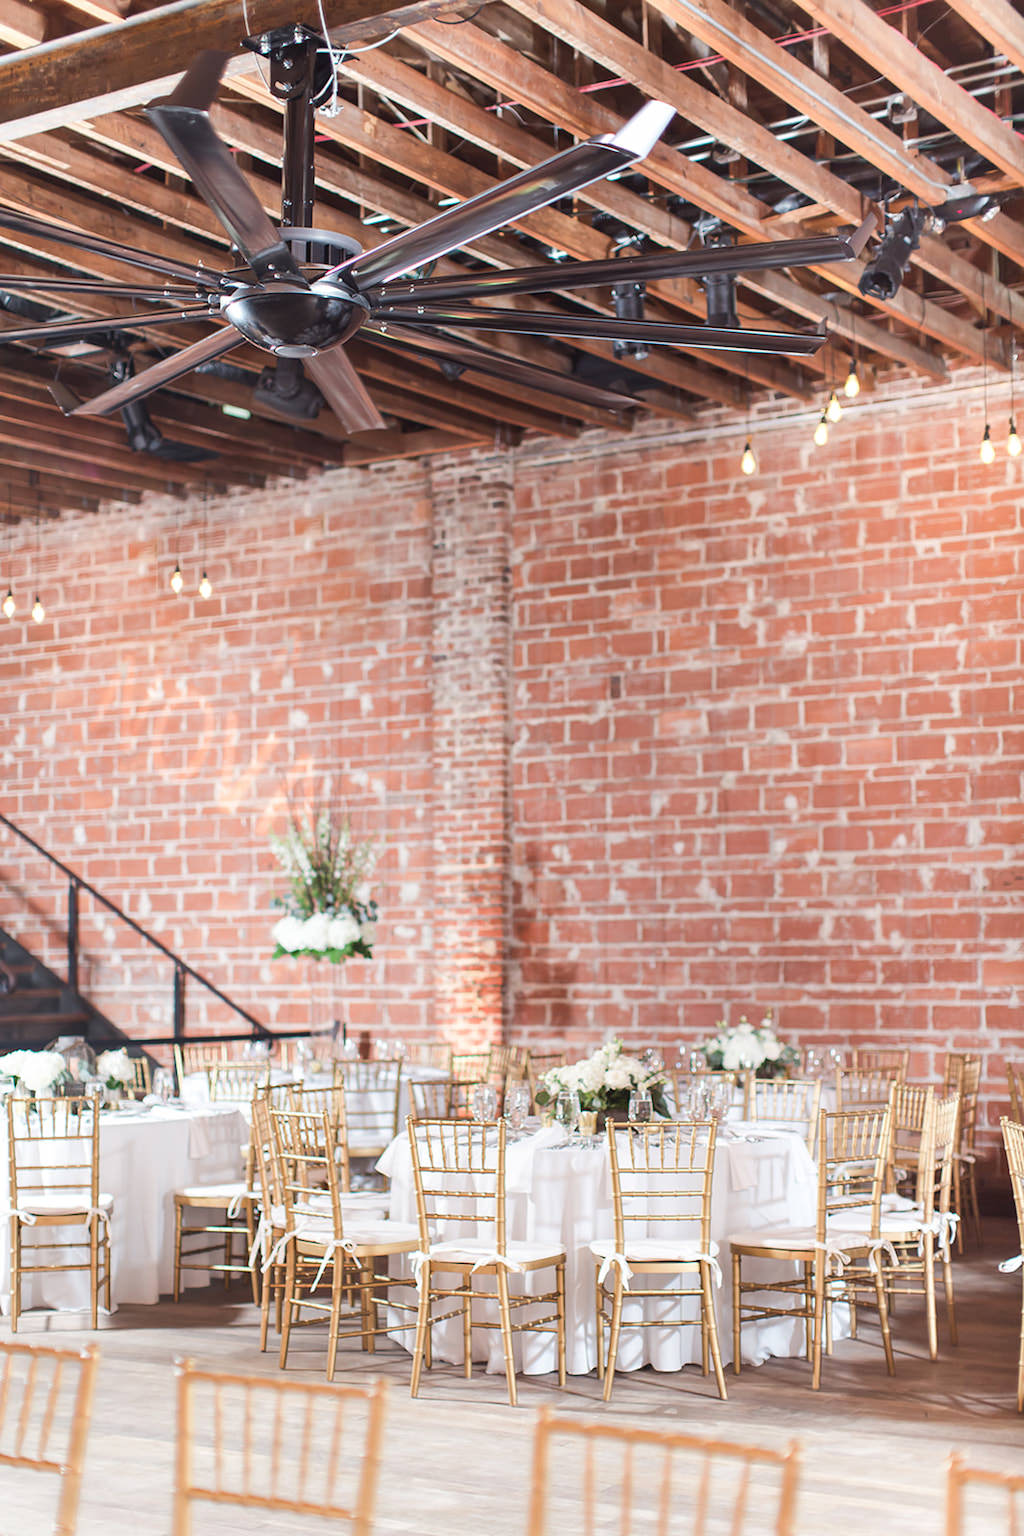 Rustic Chic Wedding Decor and Reception, Round Tables with Gold Chiavari Chairs, Against Exposed Red Brick Wall | Florida Historic Wedding Venue NOVA 535 | Tampa Bay Wedding Photographers Shauna and Jordon Photography